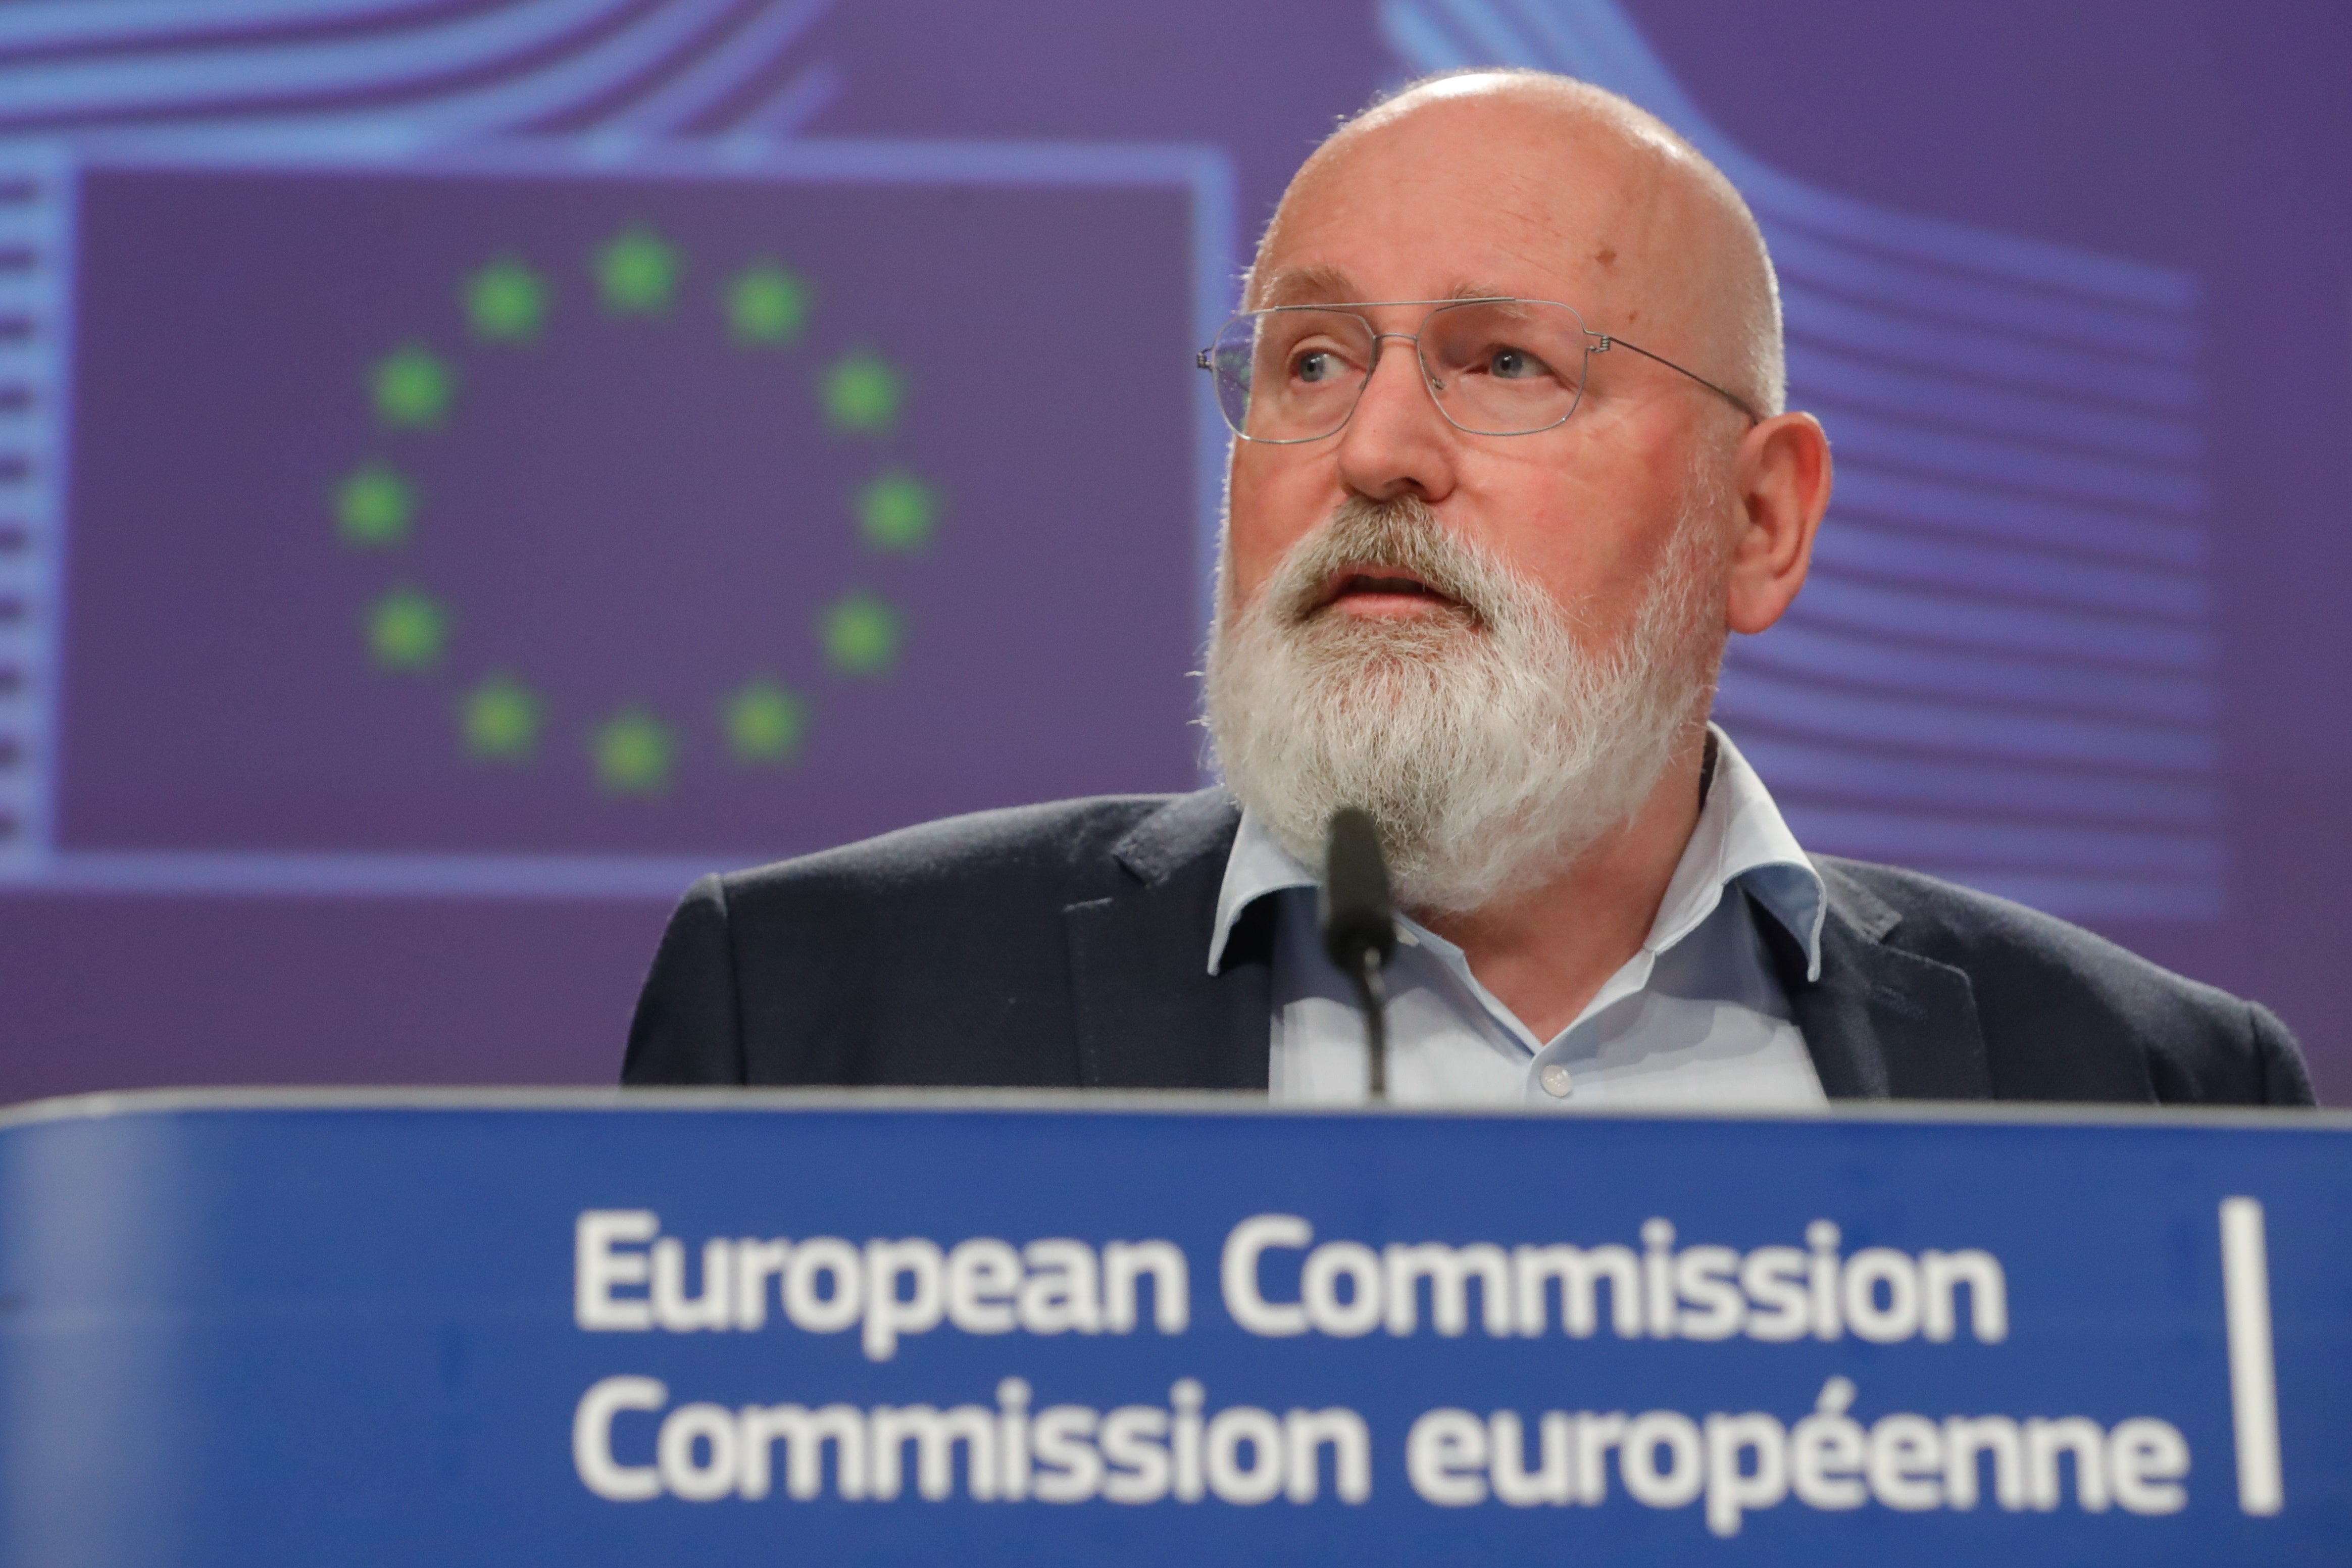 Frans Timmermans speaks at the press conference on Wednesday